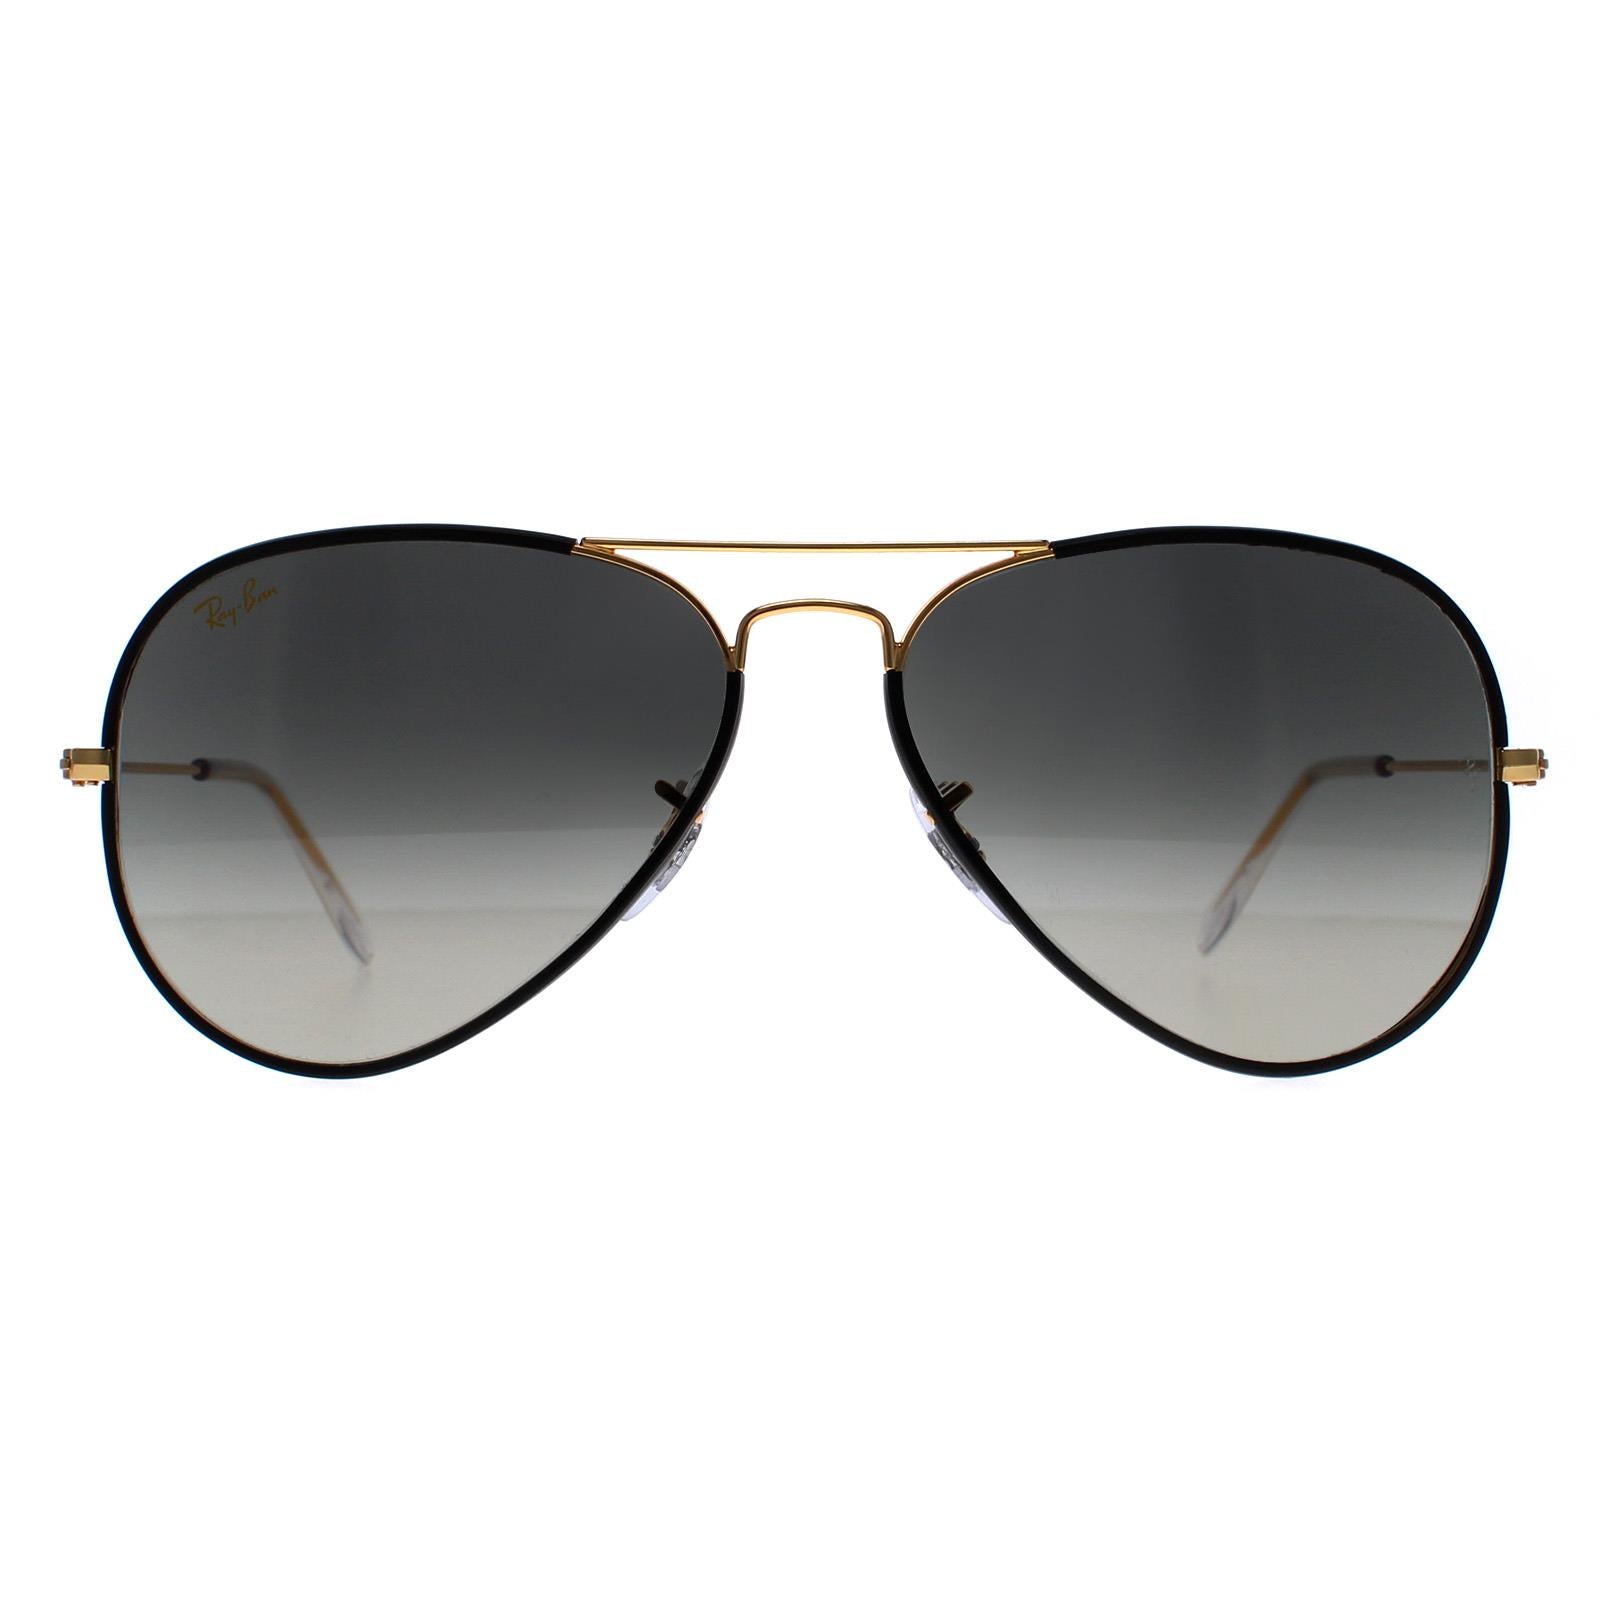 Buy Ray-Ban Sunglasses Online - Discounted Sunglasses